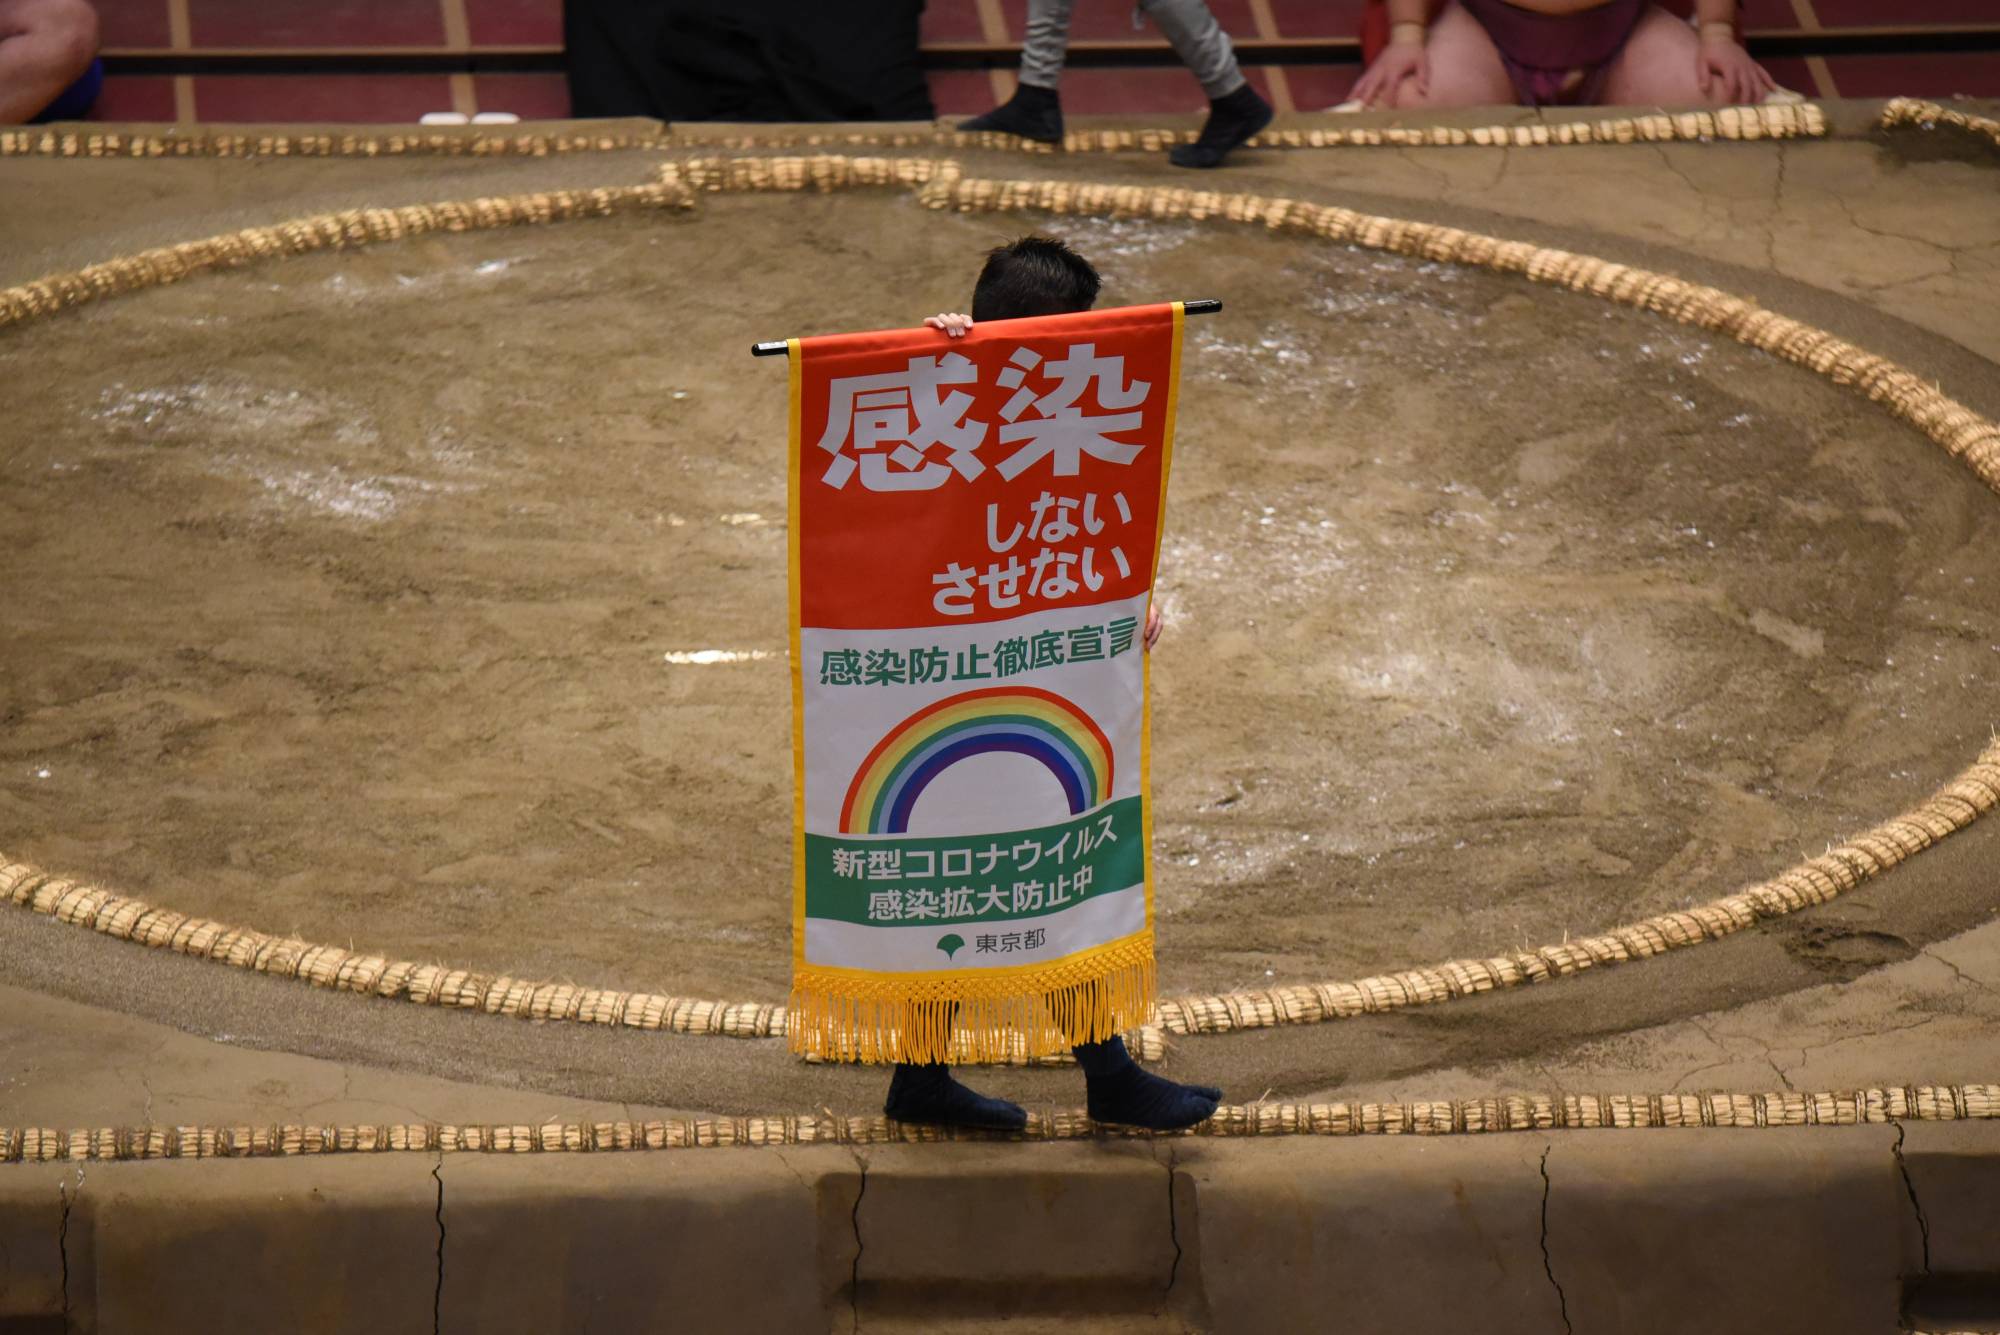 A banner promoting COVID-19 countermeasures is carried around the ring. | DAN ORLOWITZ